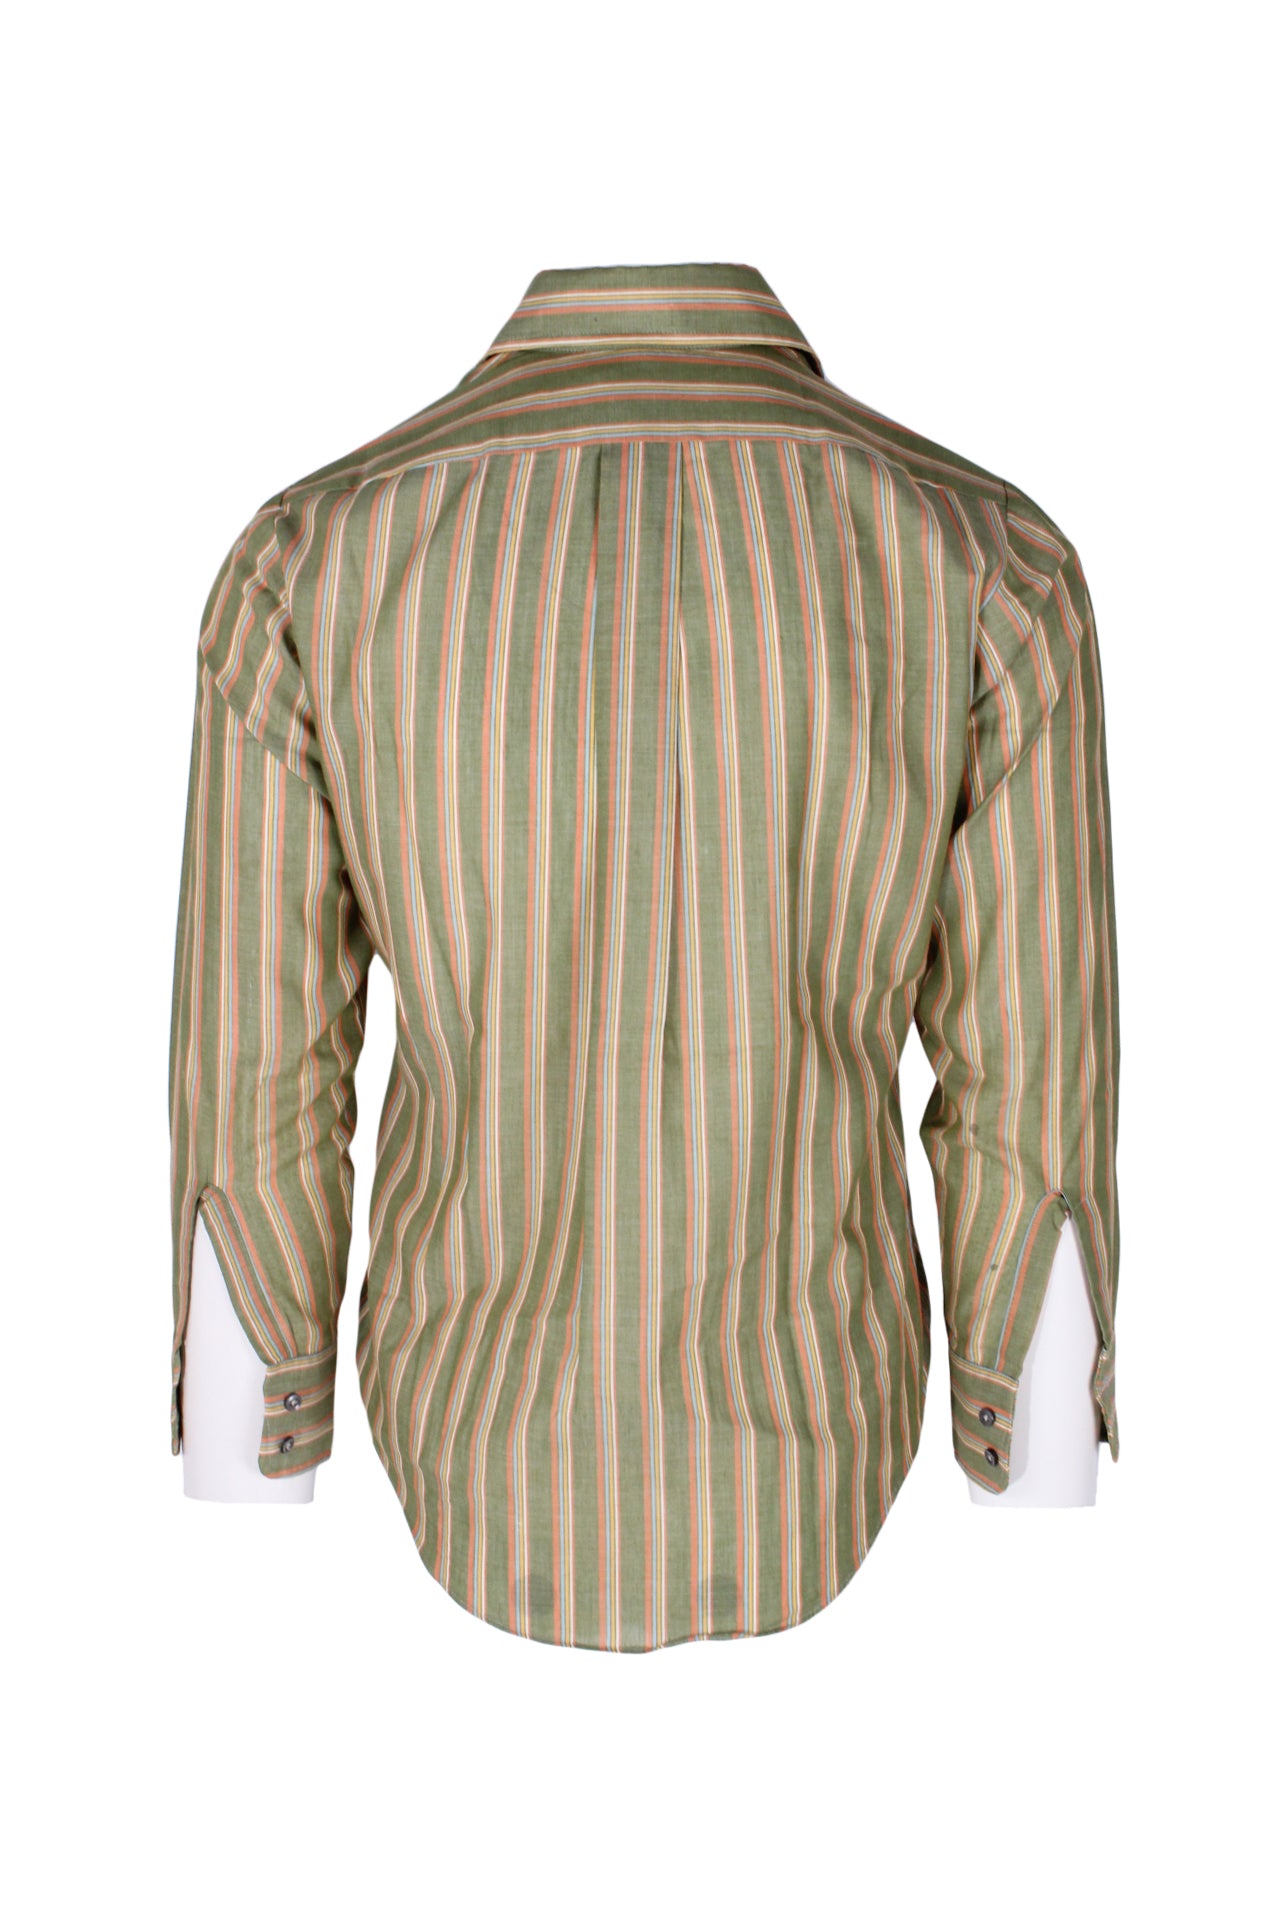 back angle of long sleeve button up shirt. double buttoned cuffs. 